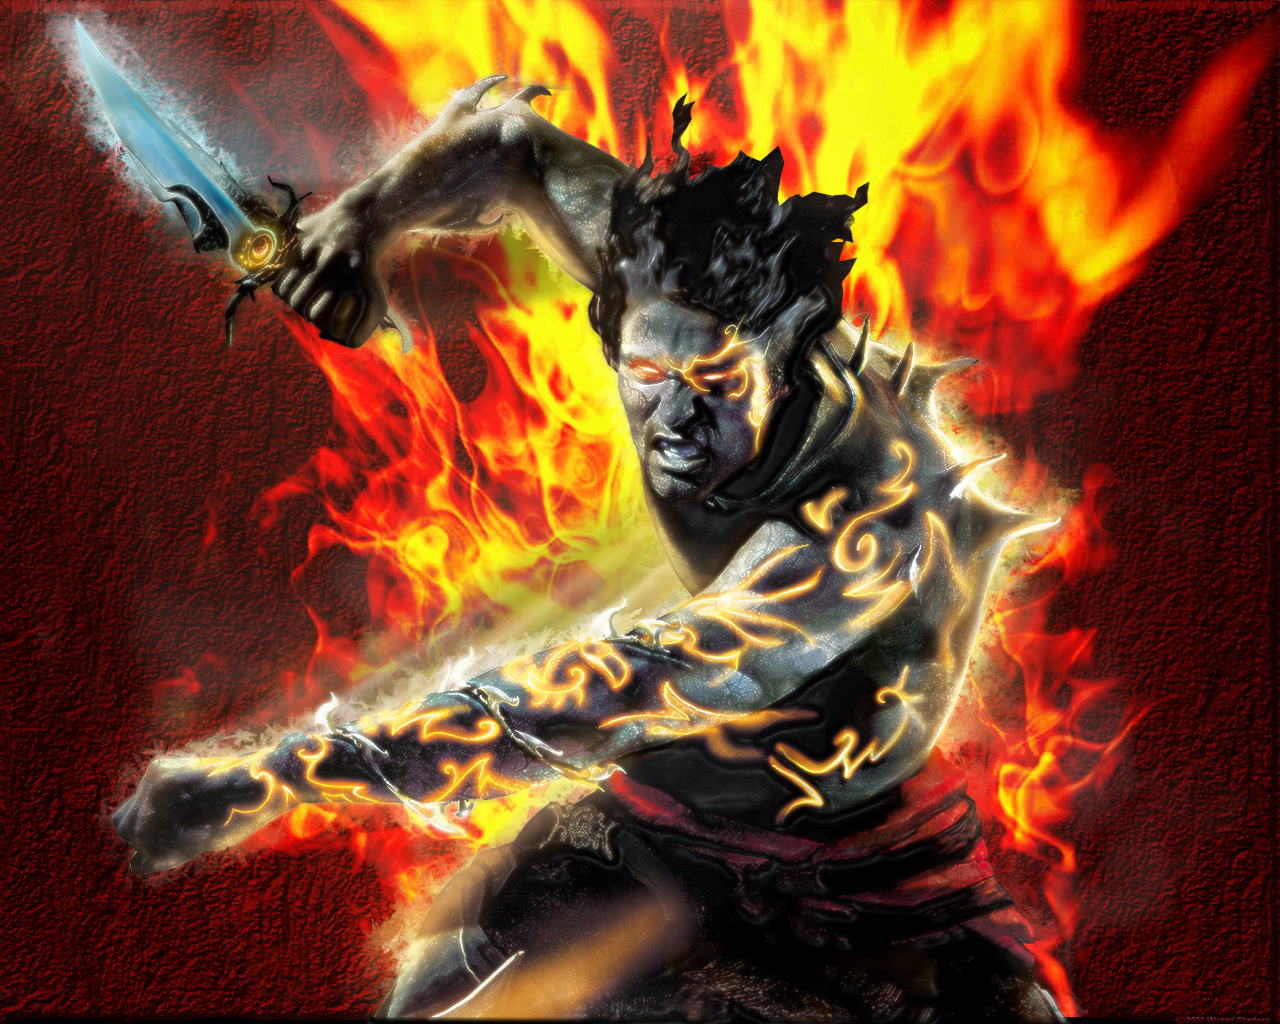 a guy is holding a sword in front of flames